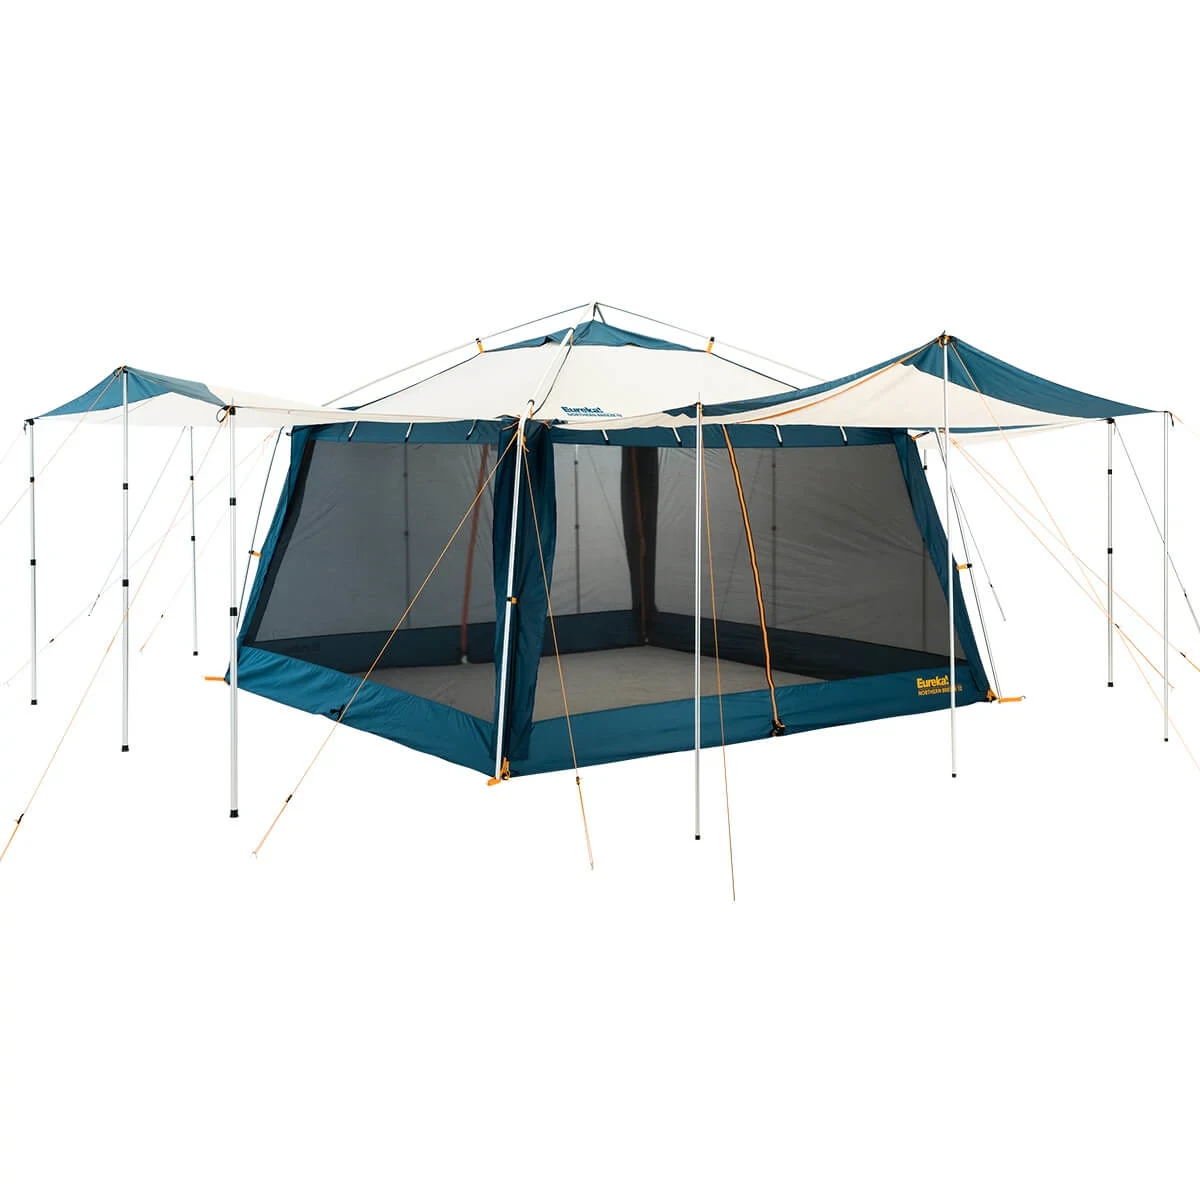 Northern Breeze 12 Screen House with Awning